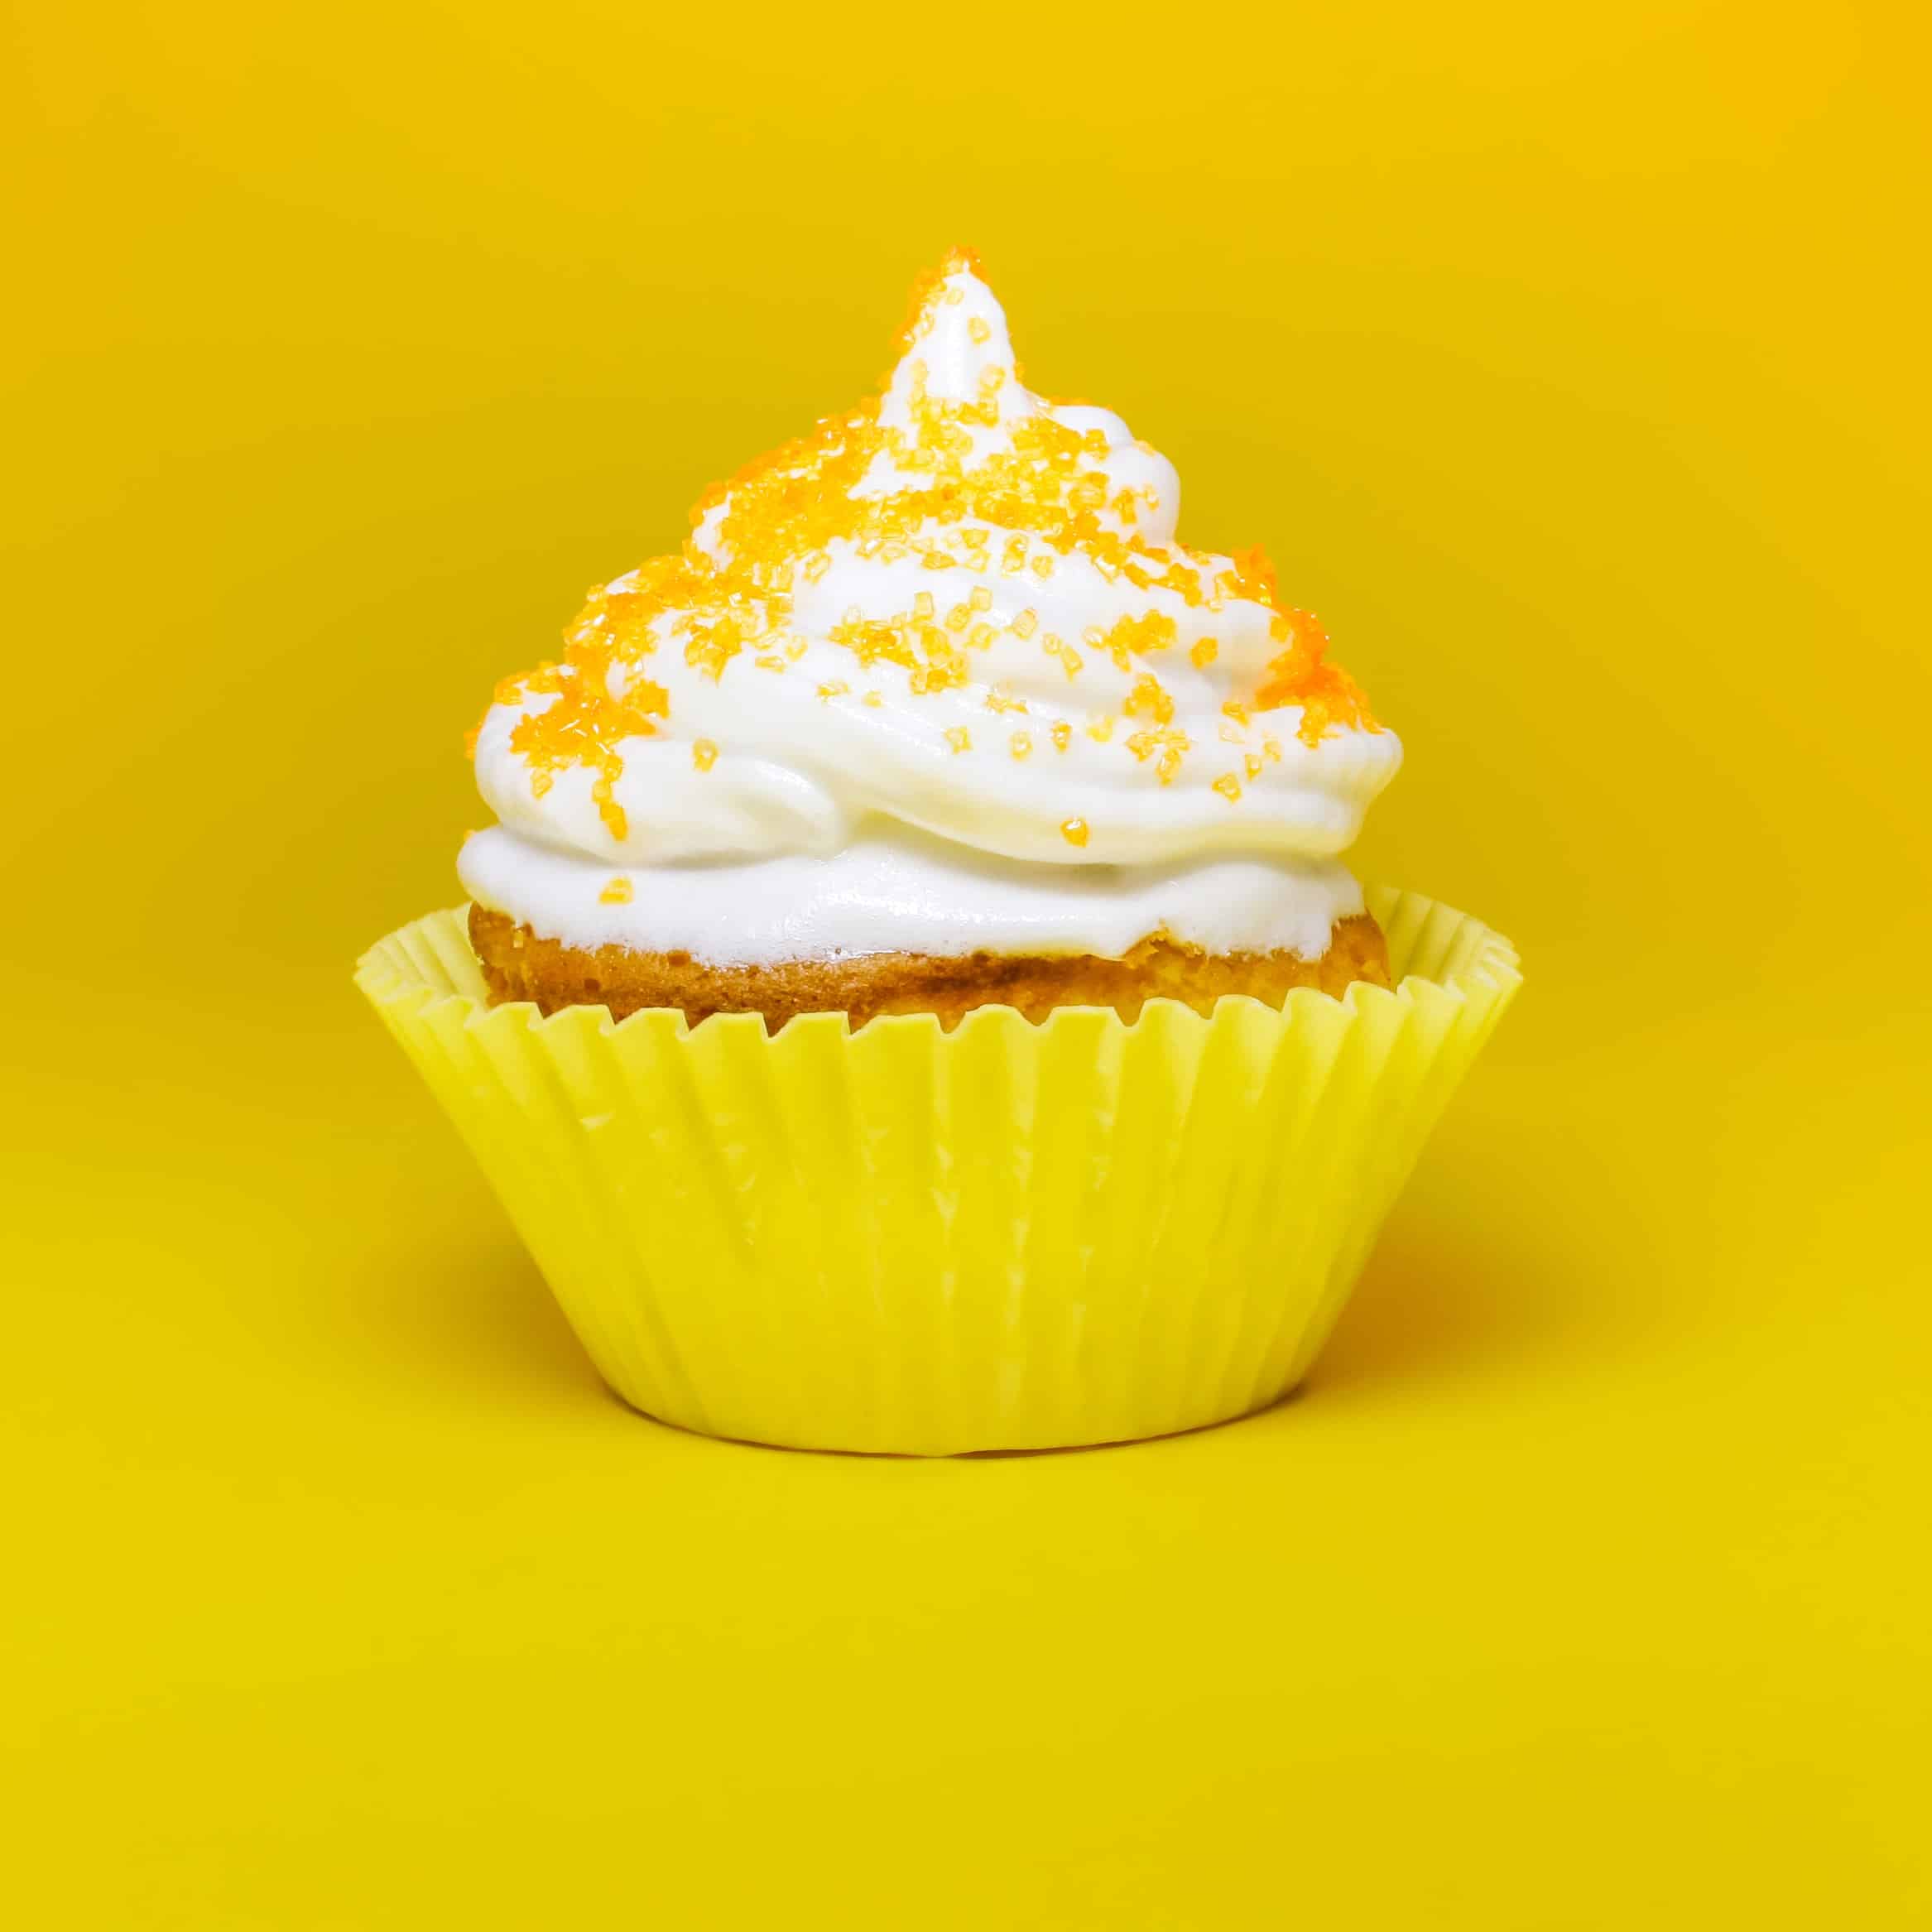 Cupcake with white frosting and lemon in a yellow wrapper on a bright yellow background